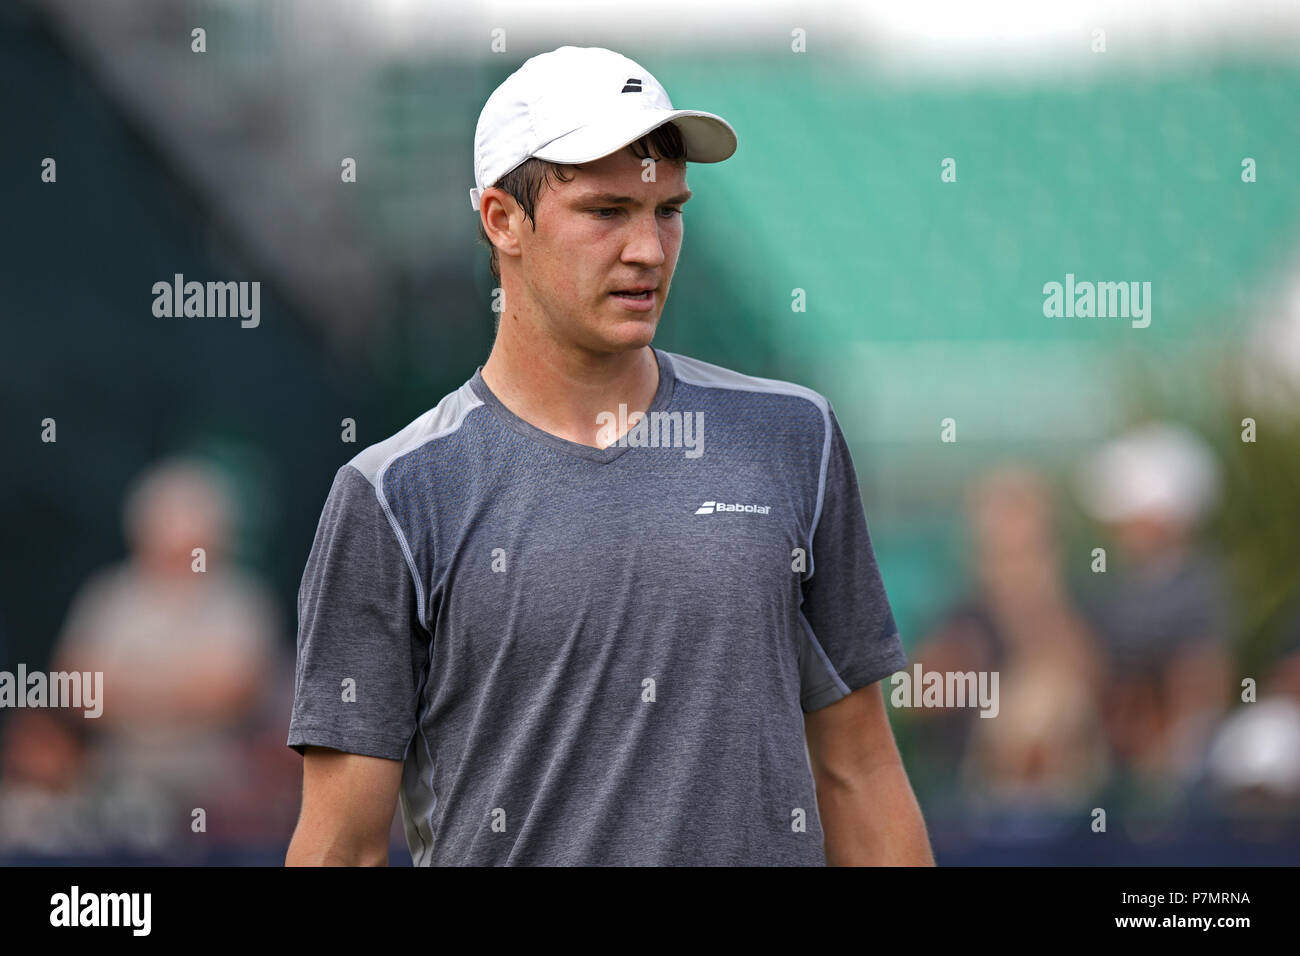 Jonathan Gray, professional male tennis player from the United Kingdom. Stock Photo